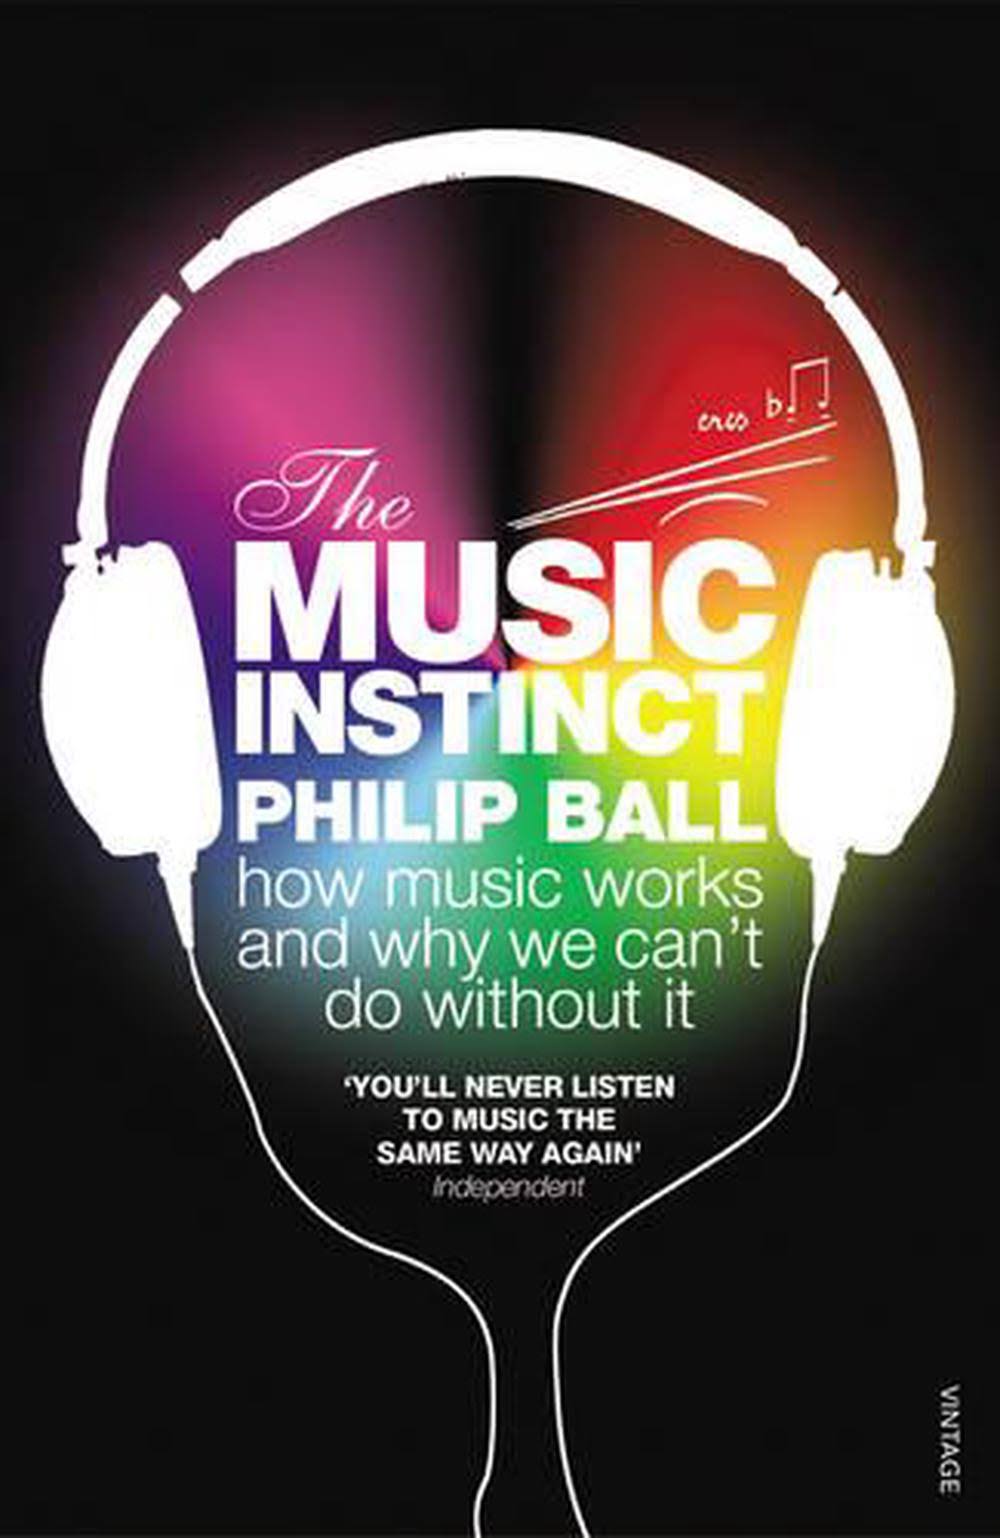 The Music Instinct by Philip Ball: How Music Works and Why We Can't Do Without It